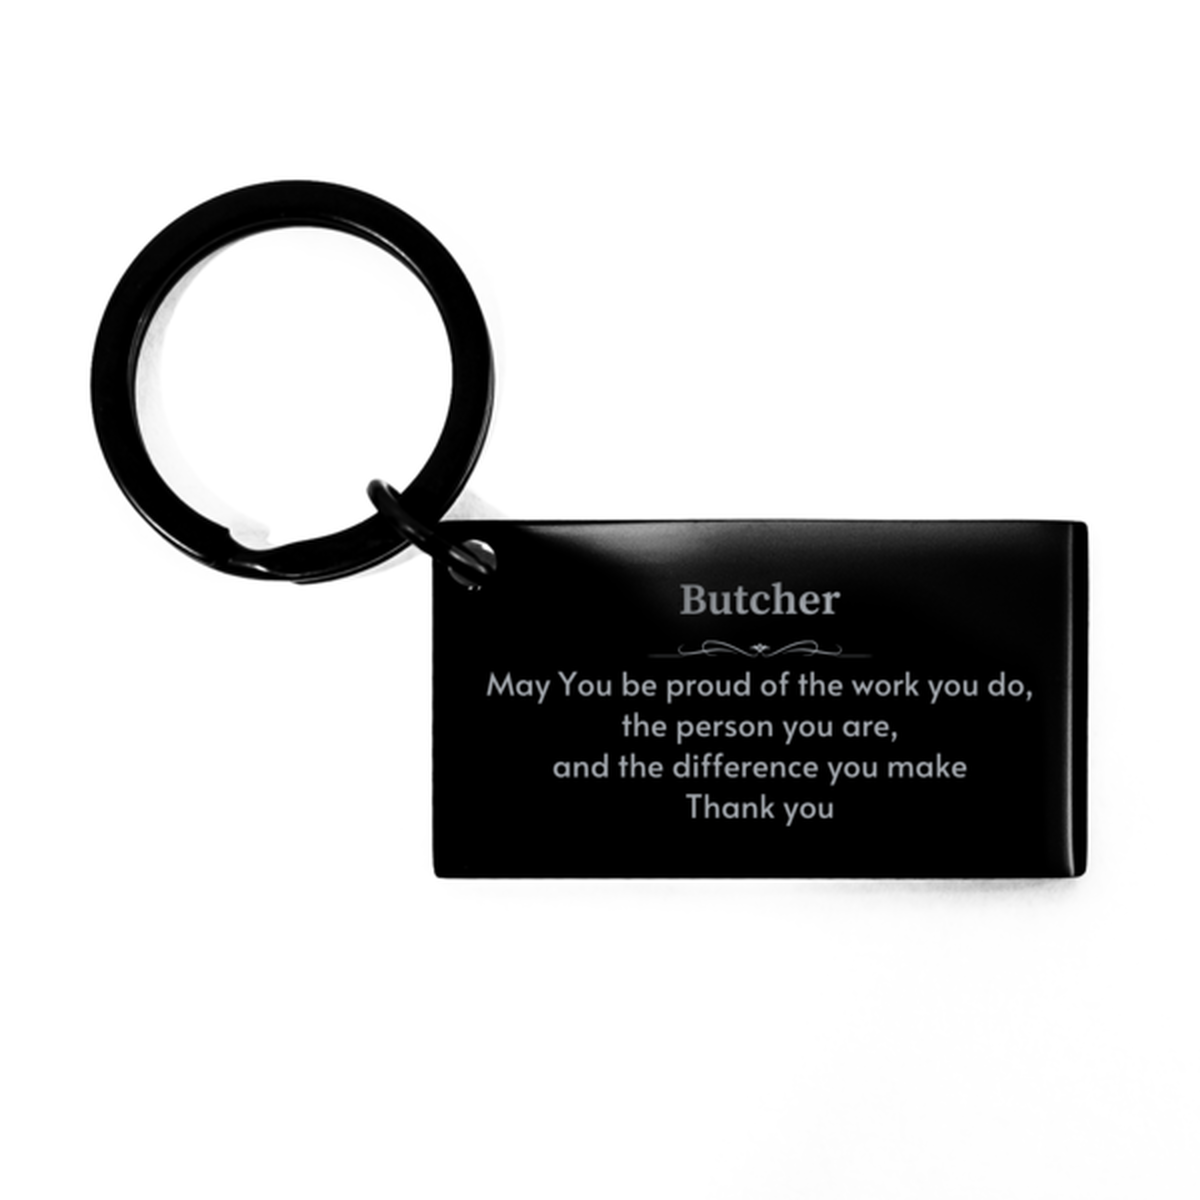 Heartwarming Keychain Retirement Coworkers Gifts for Butcher, Dealer May You be proud of the work you do, the person you are Gifts for Boss Men Women Friends